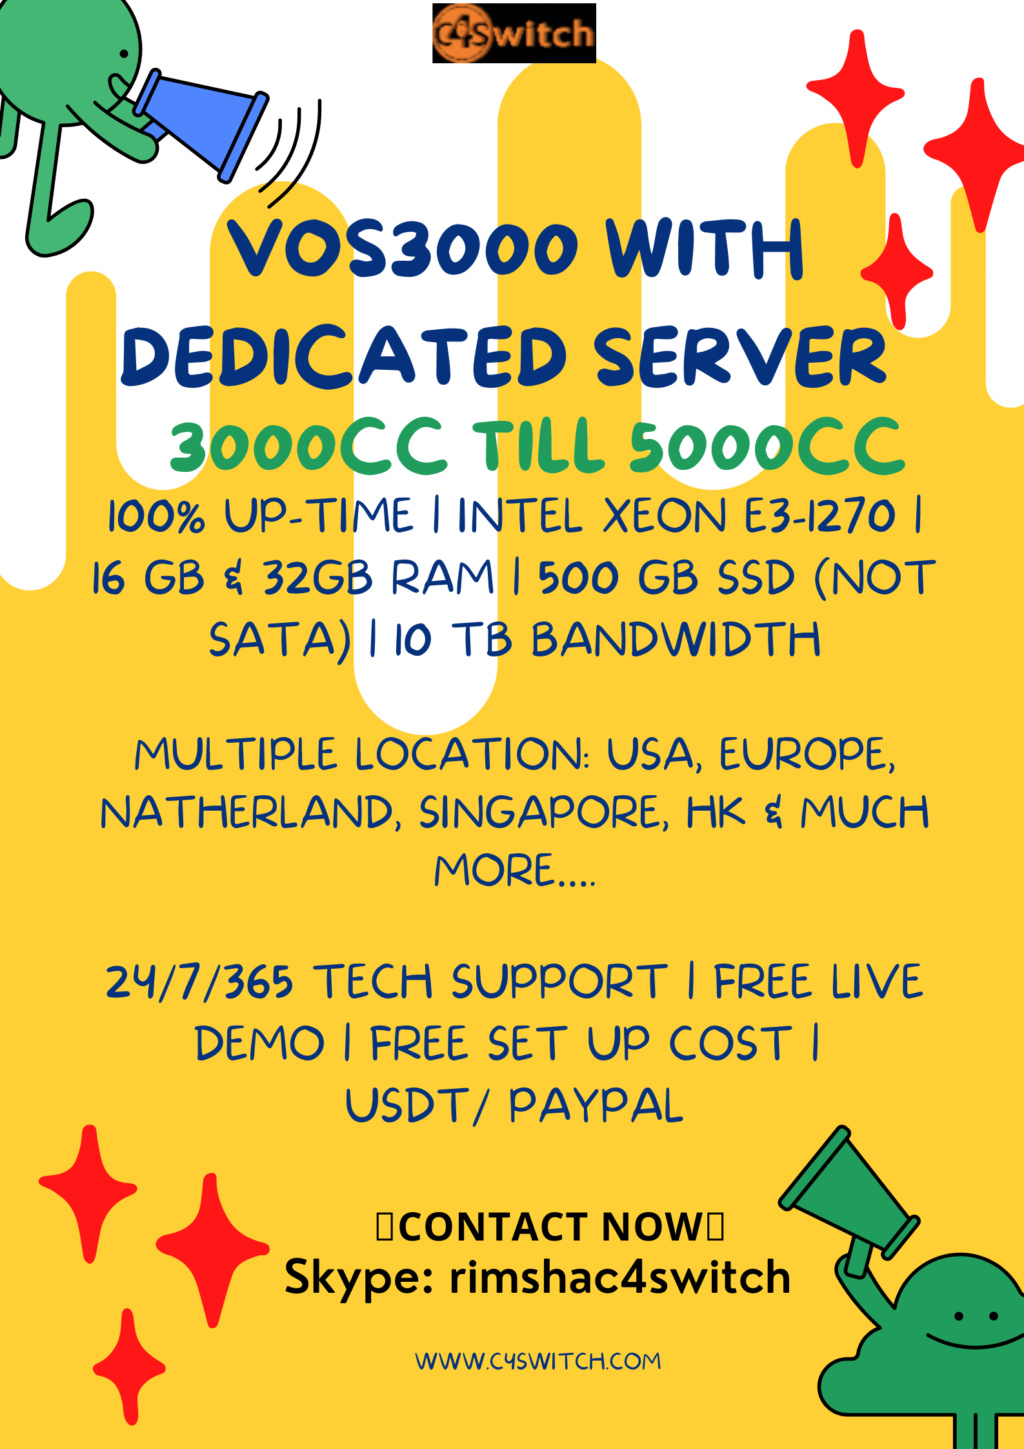 VOS3000 with DEDICATED SERVERS & MULTIPLE CO LOCATIONS.. Vos30018